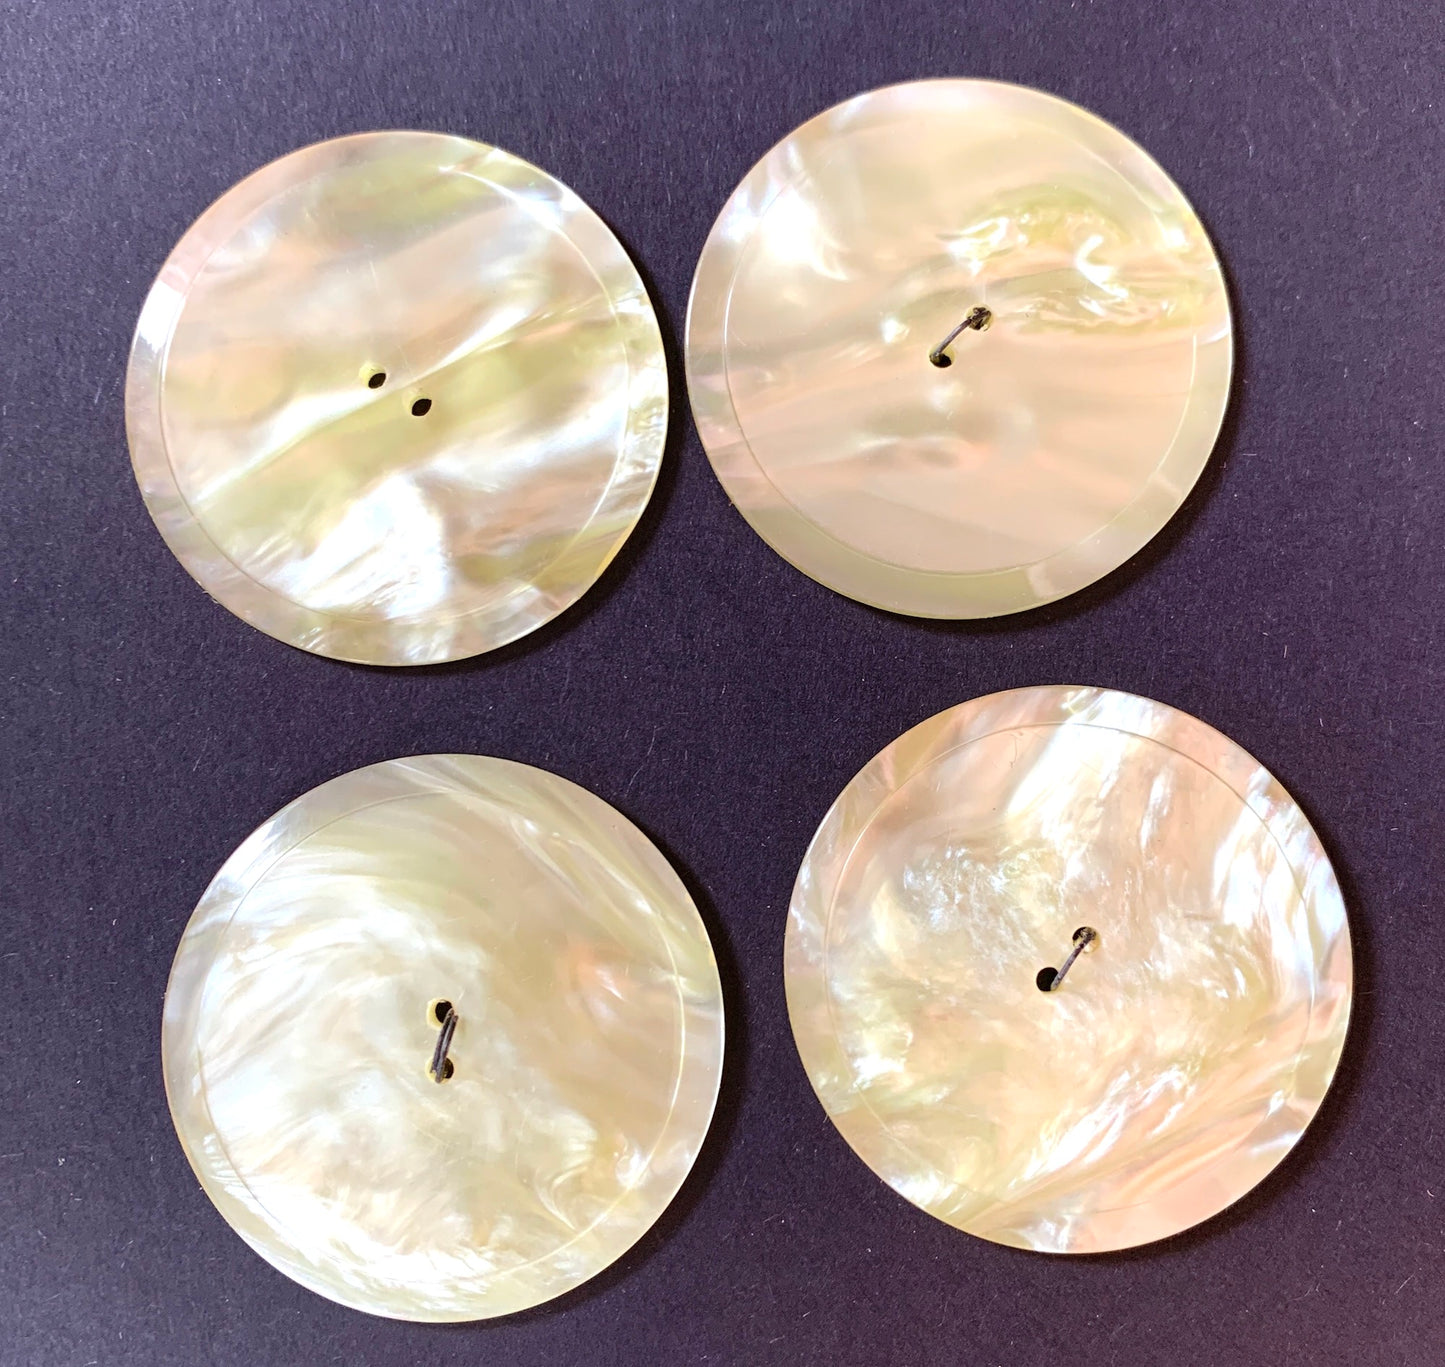 Gloriously Shimmering 1940s Moonglow Lucite Yellow Buttons - 3.8cm, 2.6cm, 2cm or 1.7cm.Made in England